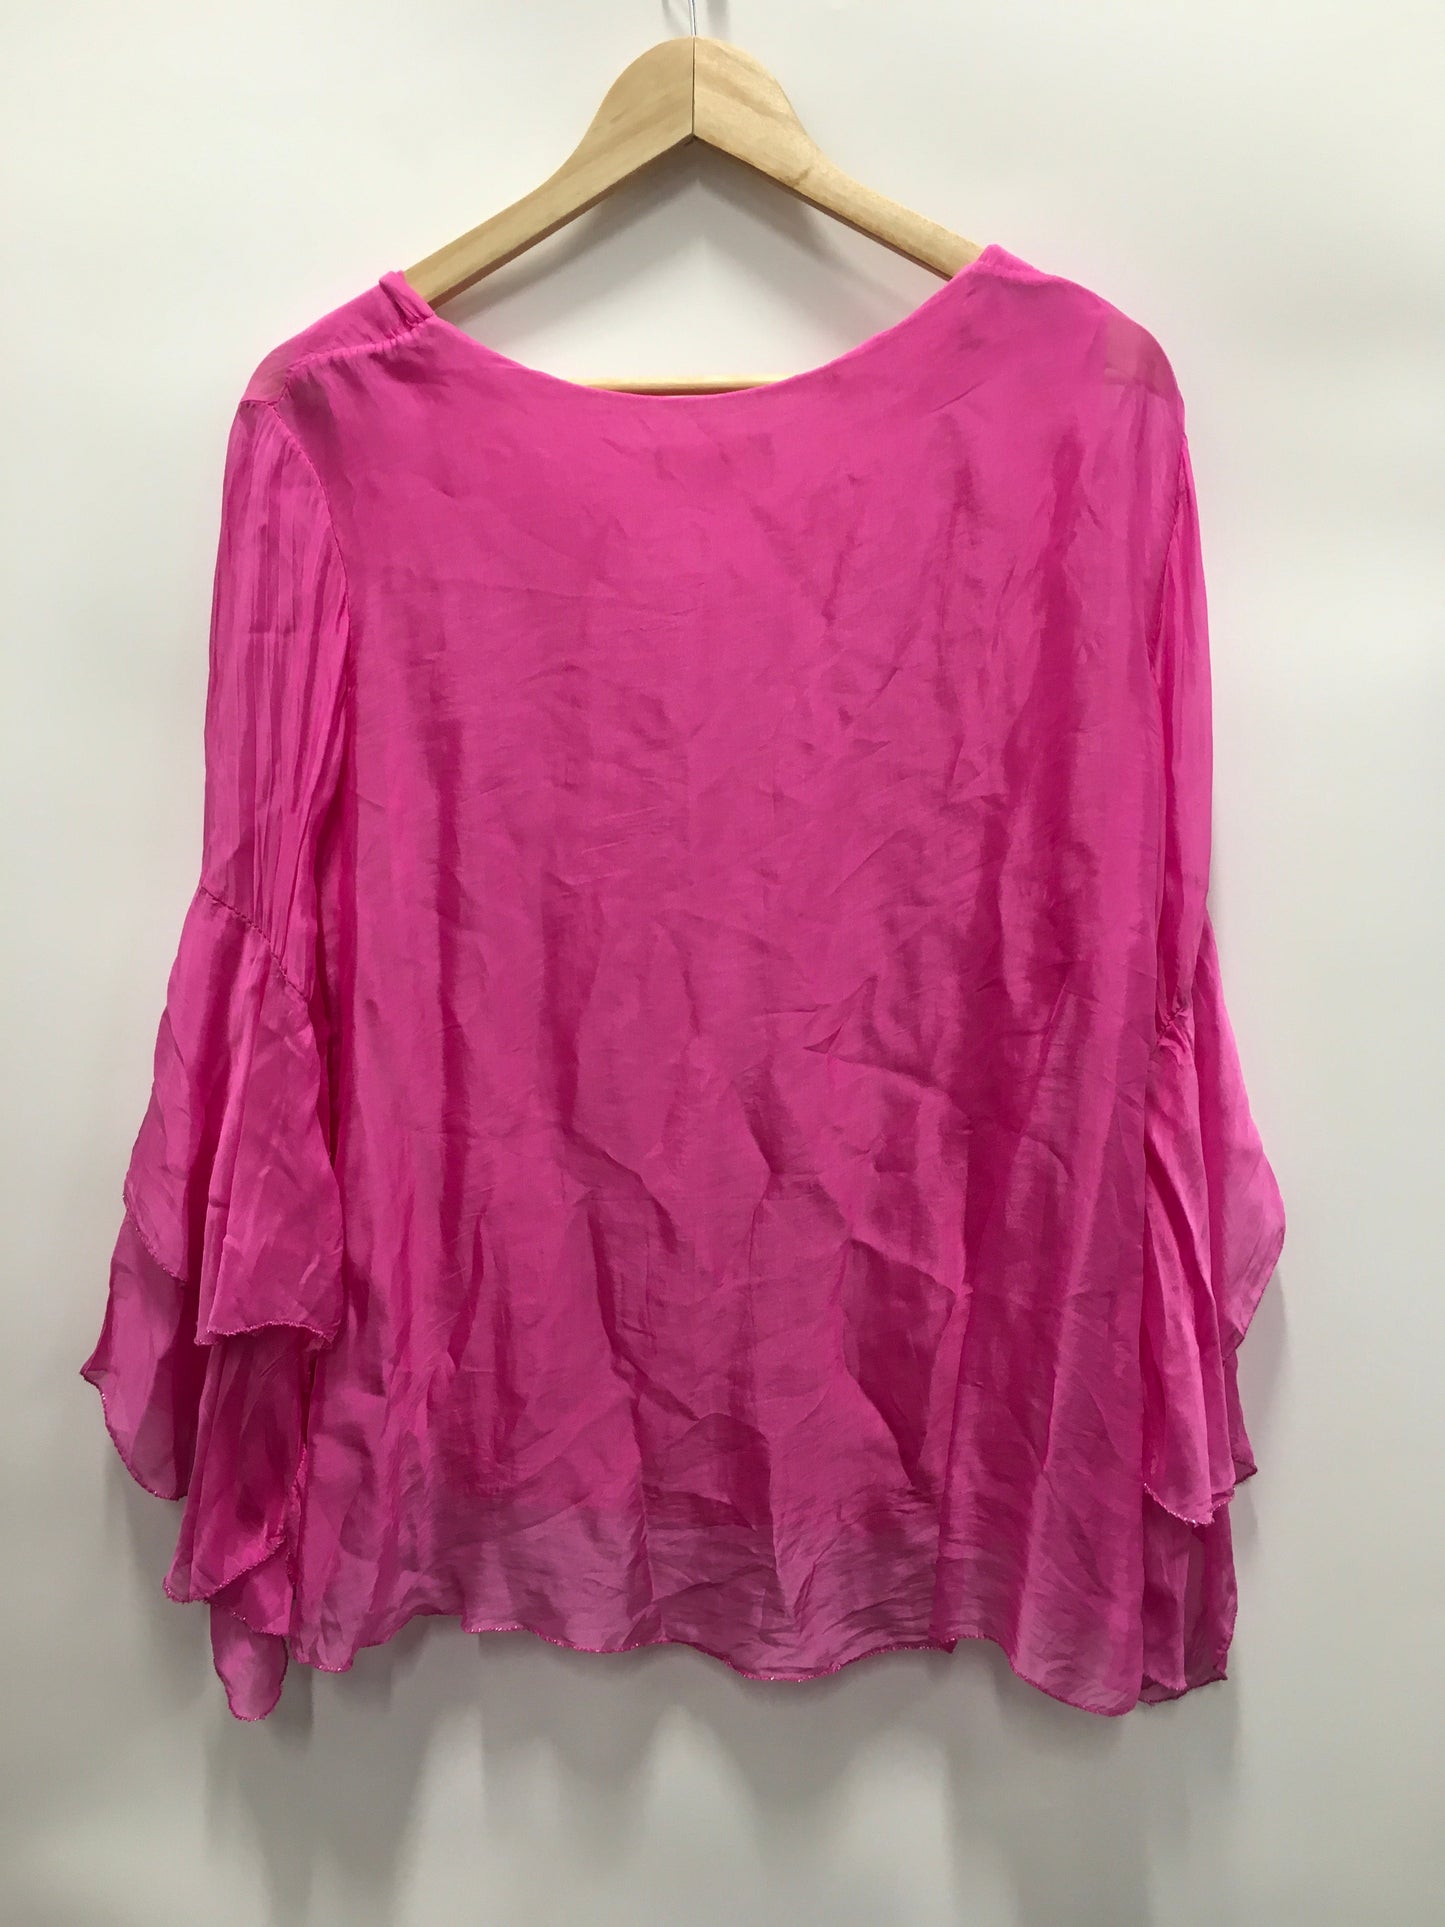 Top Long Sleeve By Belle France Size: S